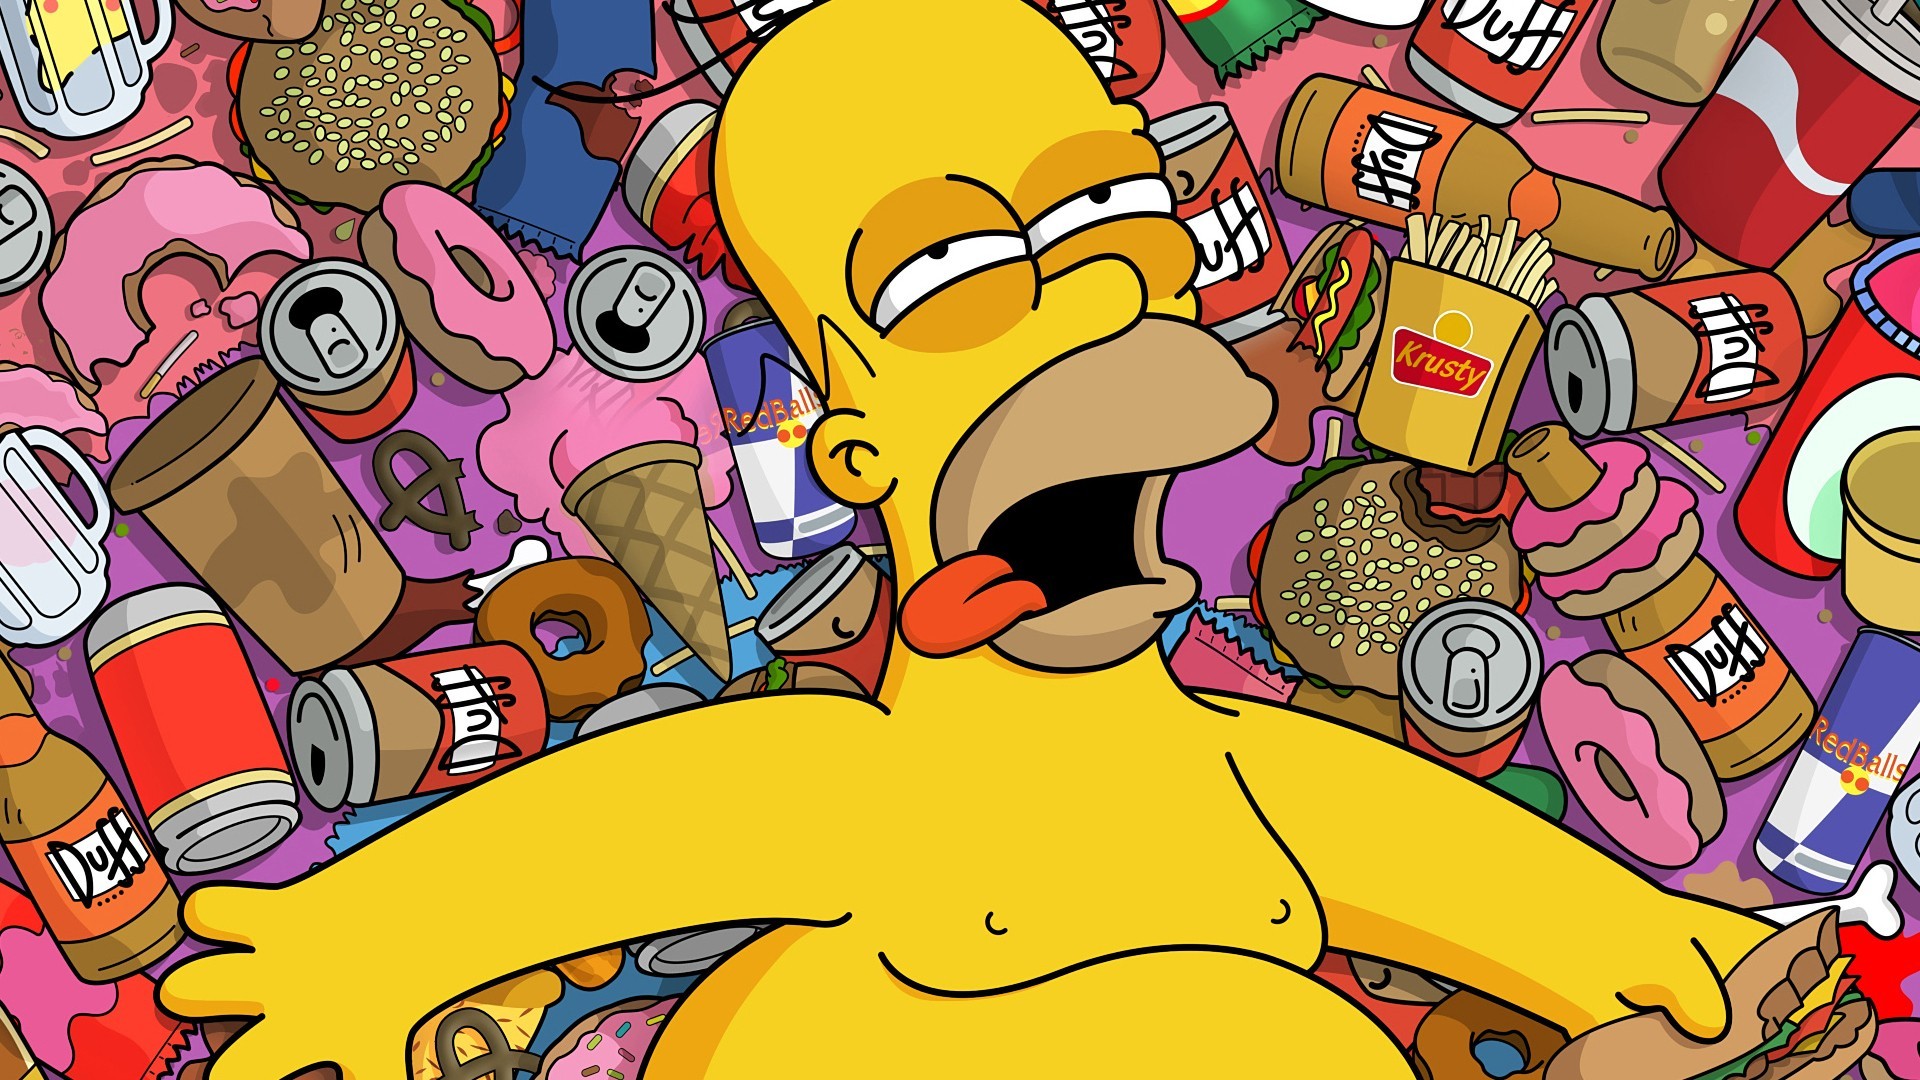 General 1920x1080 Homer Simpson The Simpsons food Duff cartoon TV series tongues tongue out beer sweets ice cream fries can bottles sandwiches